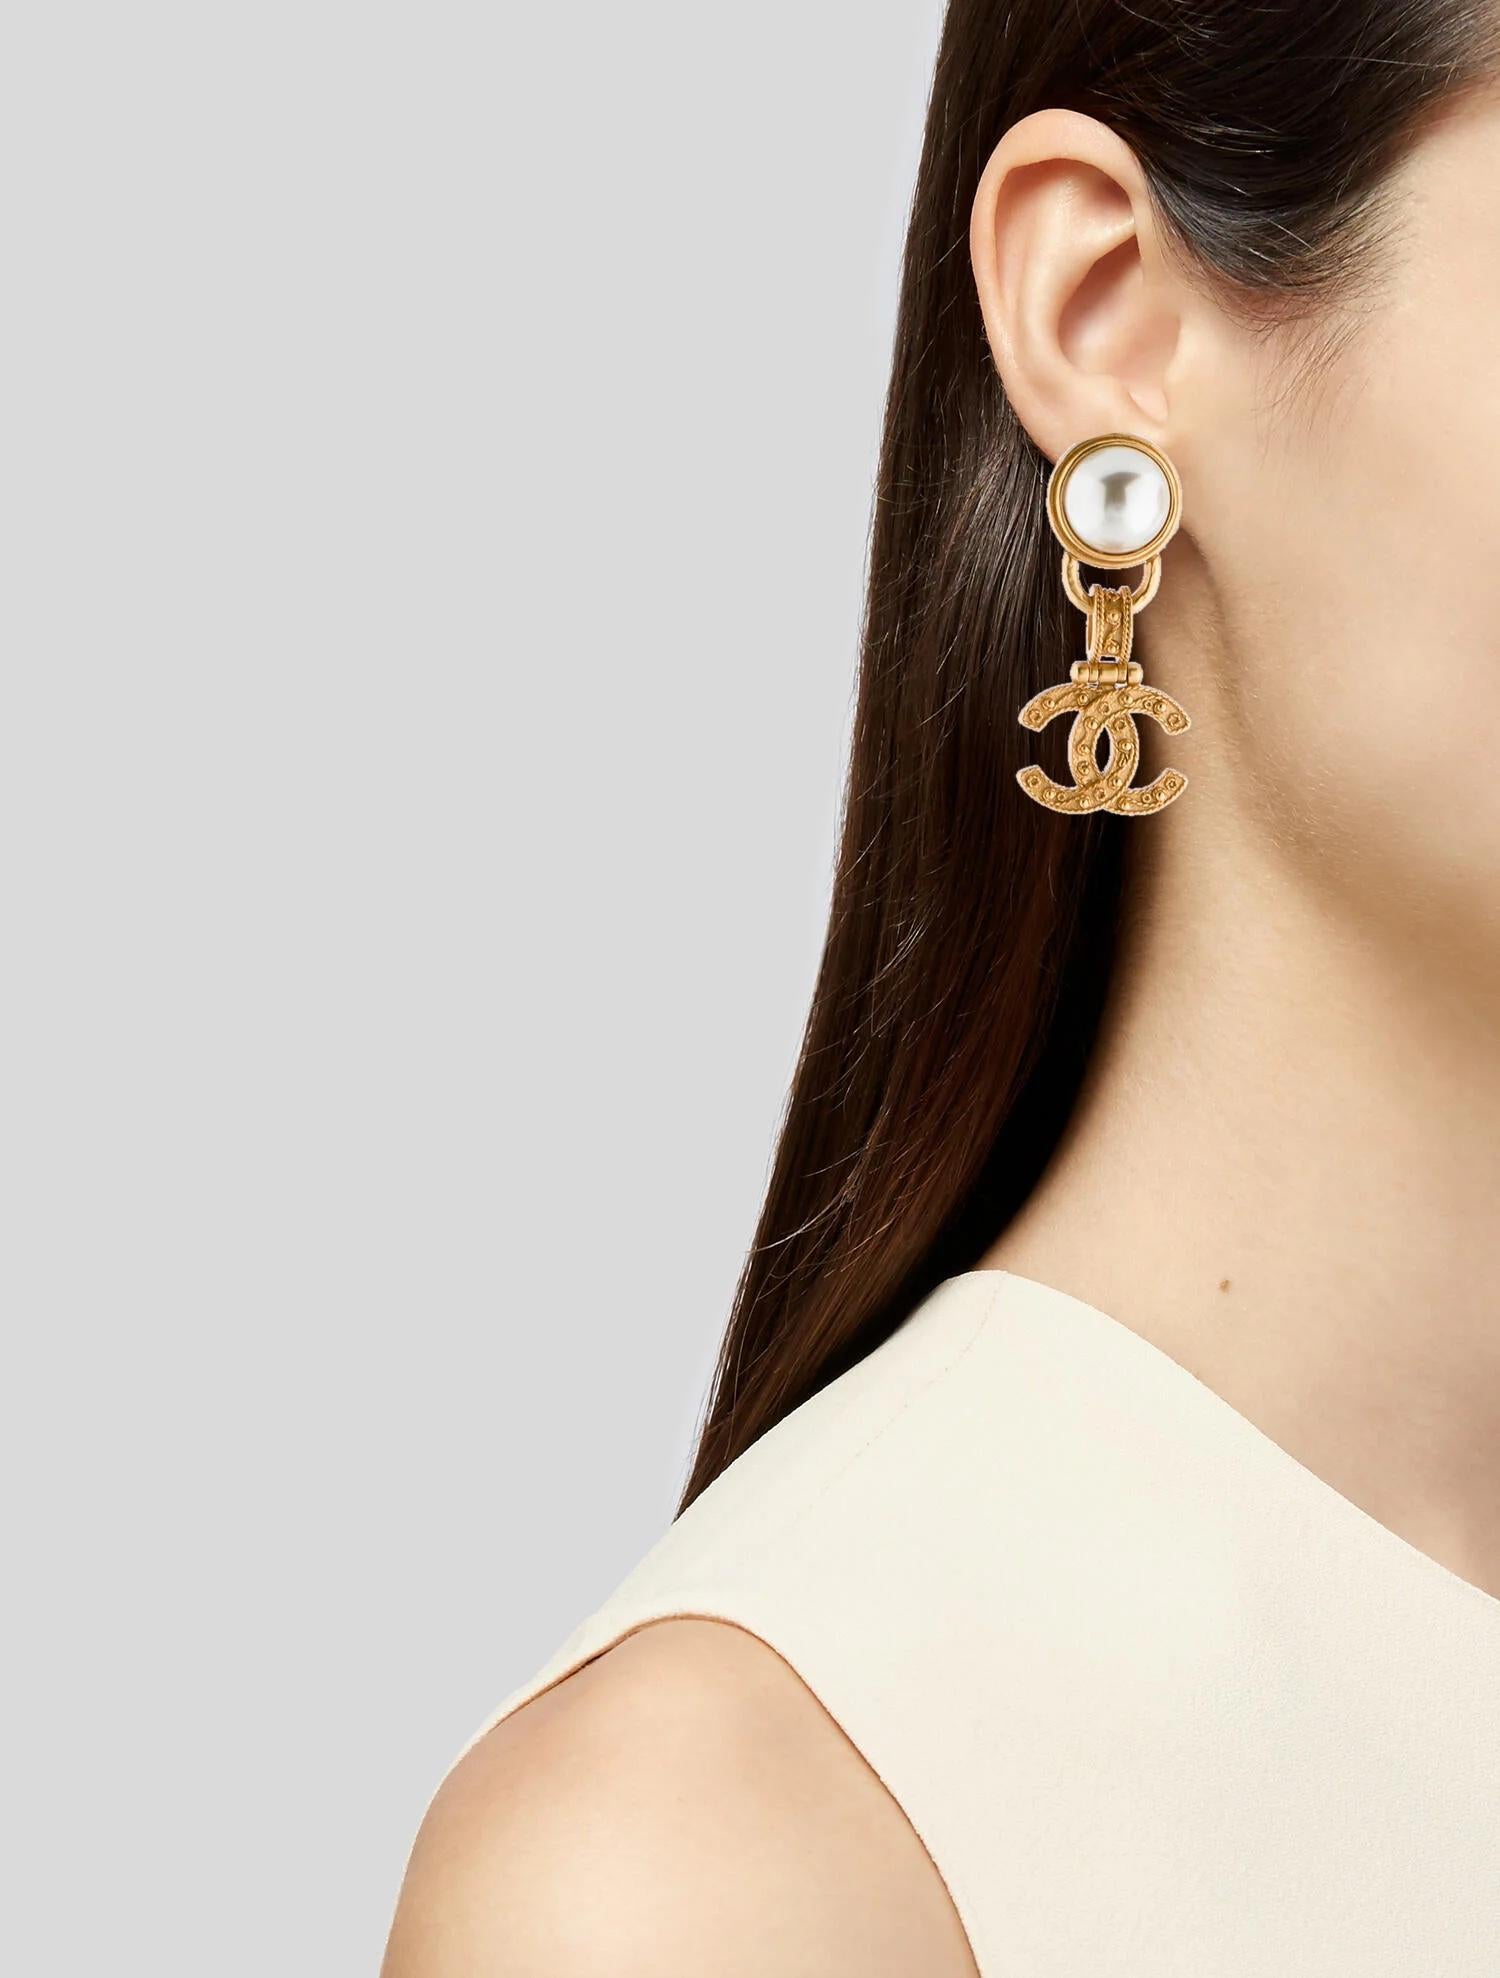 These vintage earrings are from the spring 1994 collection and are made with gold tone metal and a faux pearl. The earrings feature clip closure, designer signature, designer code and a highly polished and textured finish with a drop of about 2.2